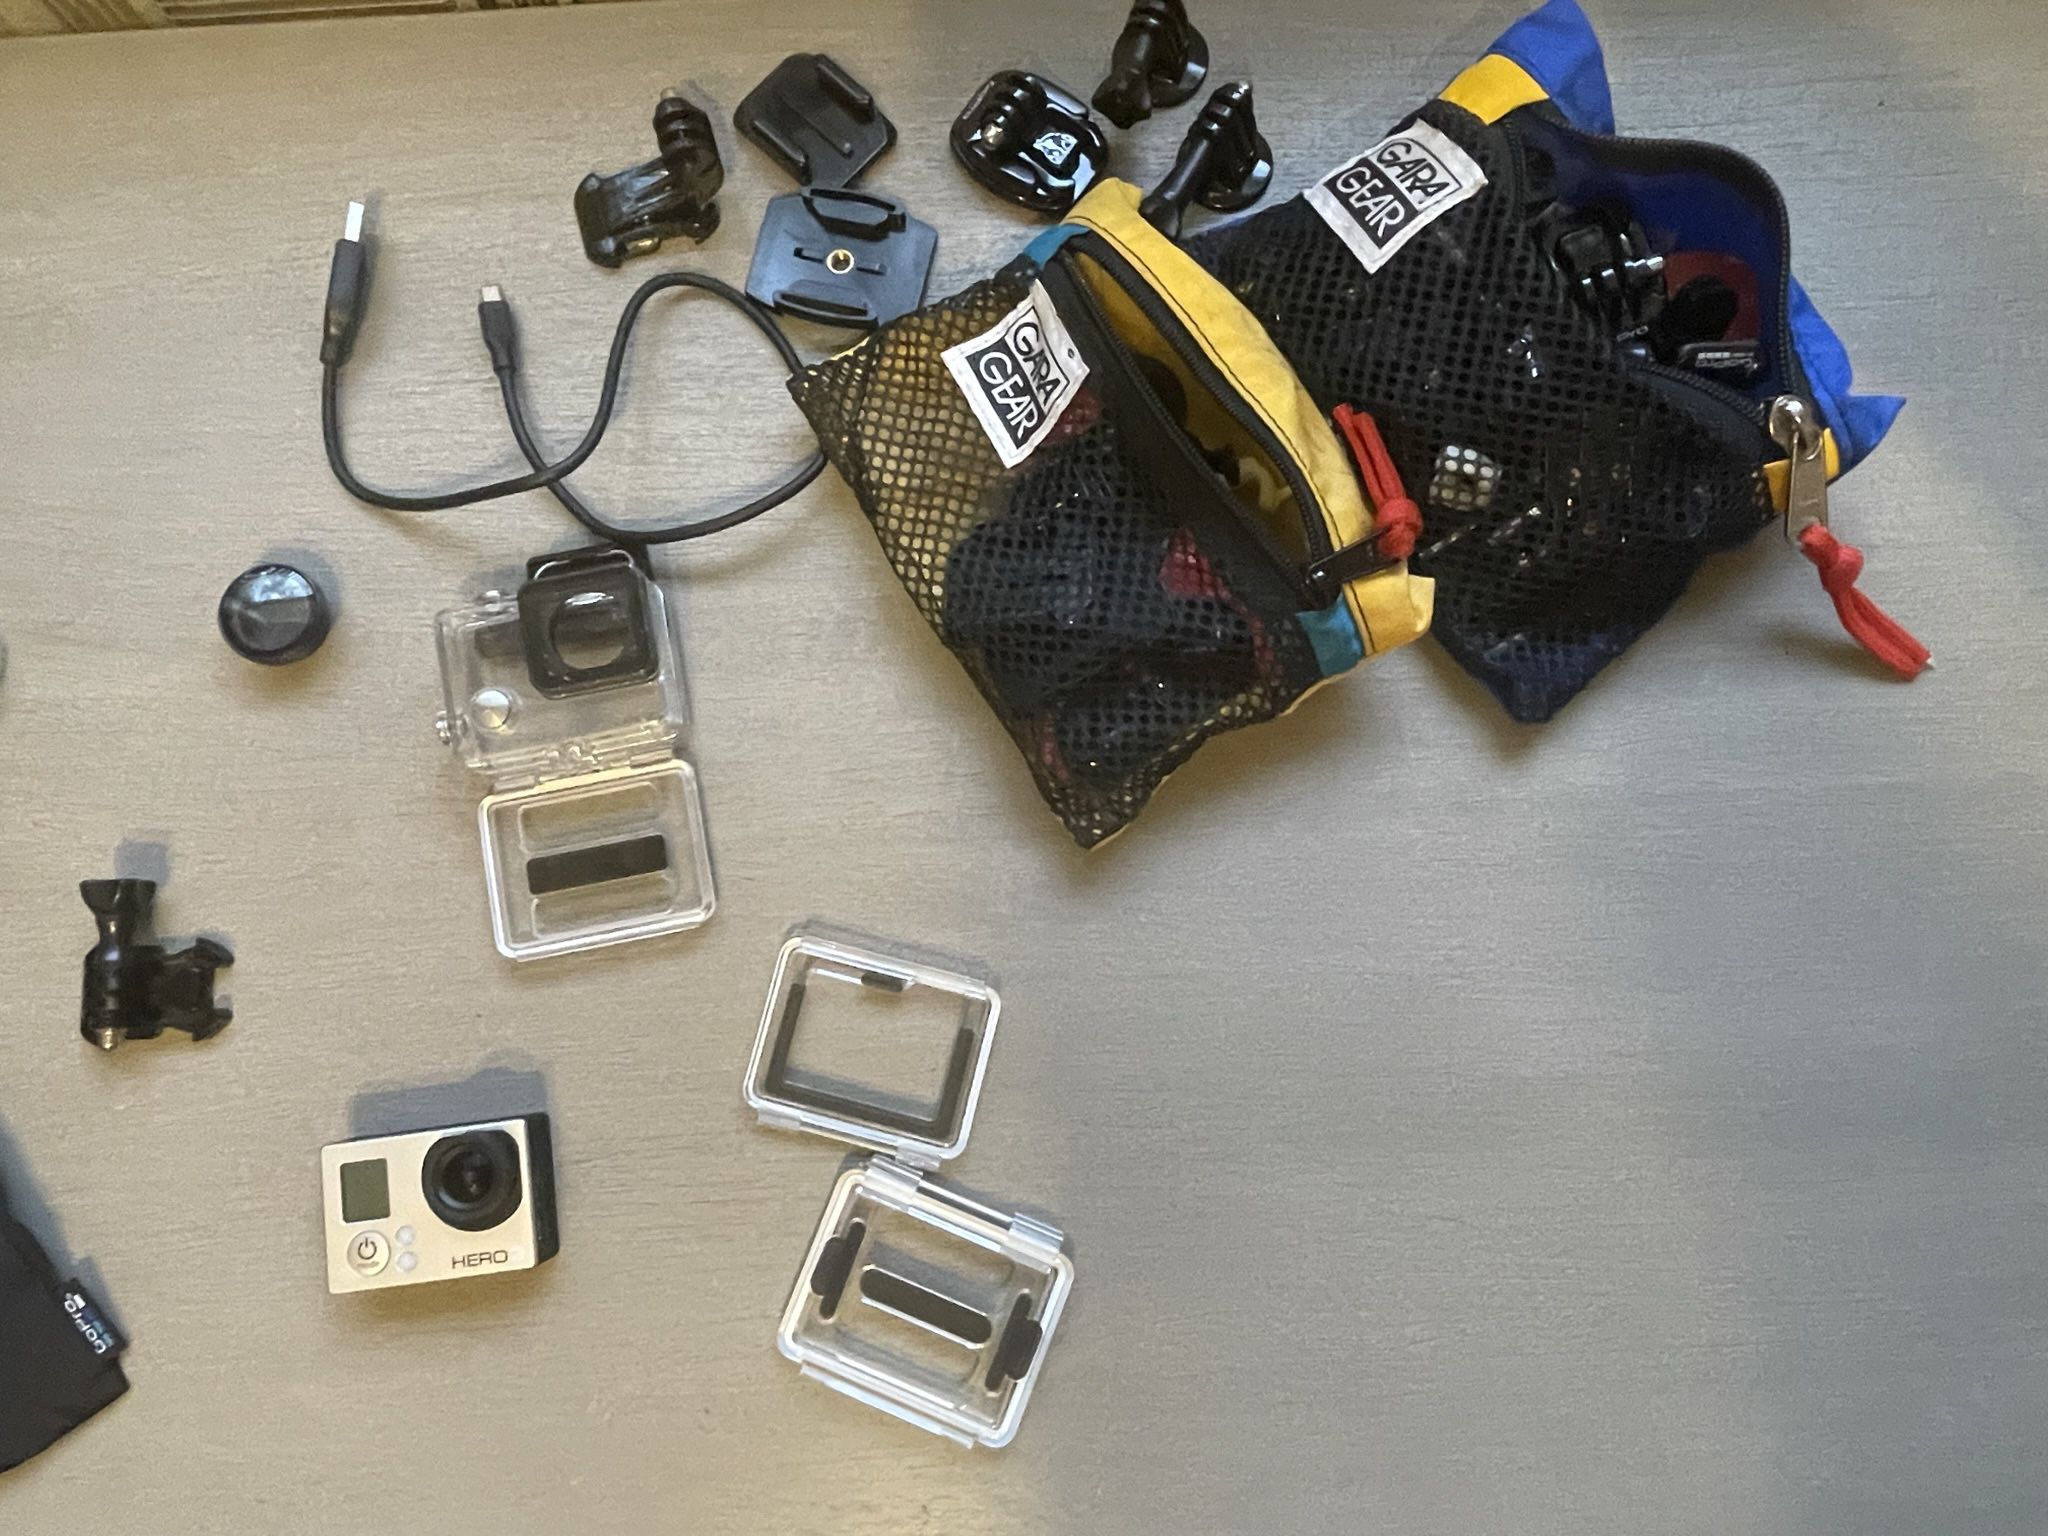 GoPro Hero 3 And Accessories